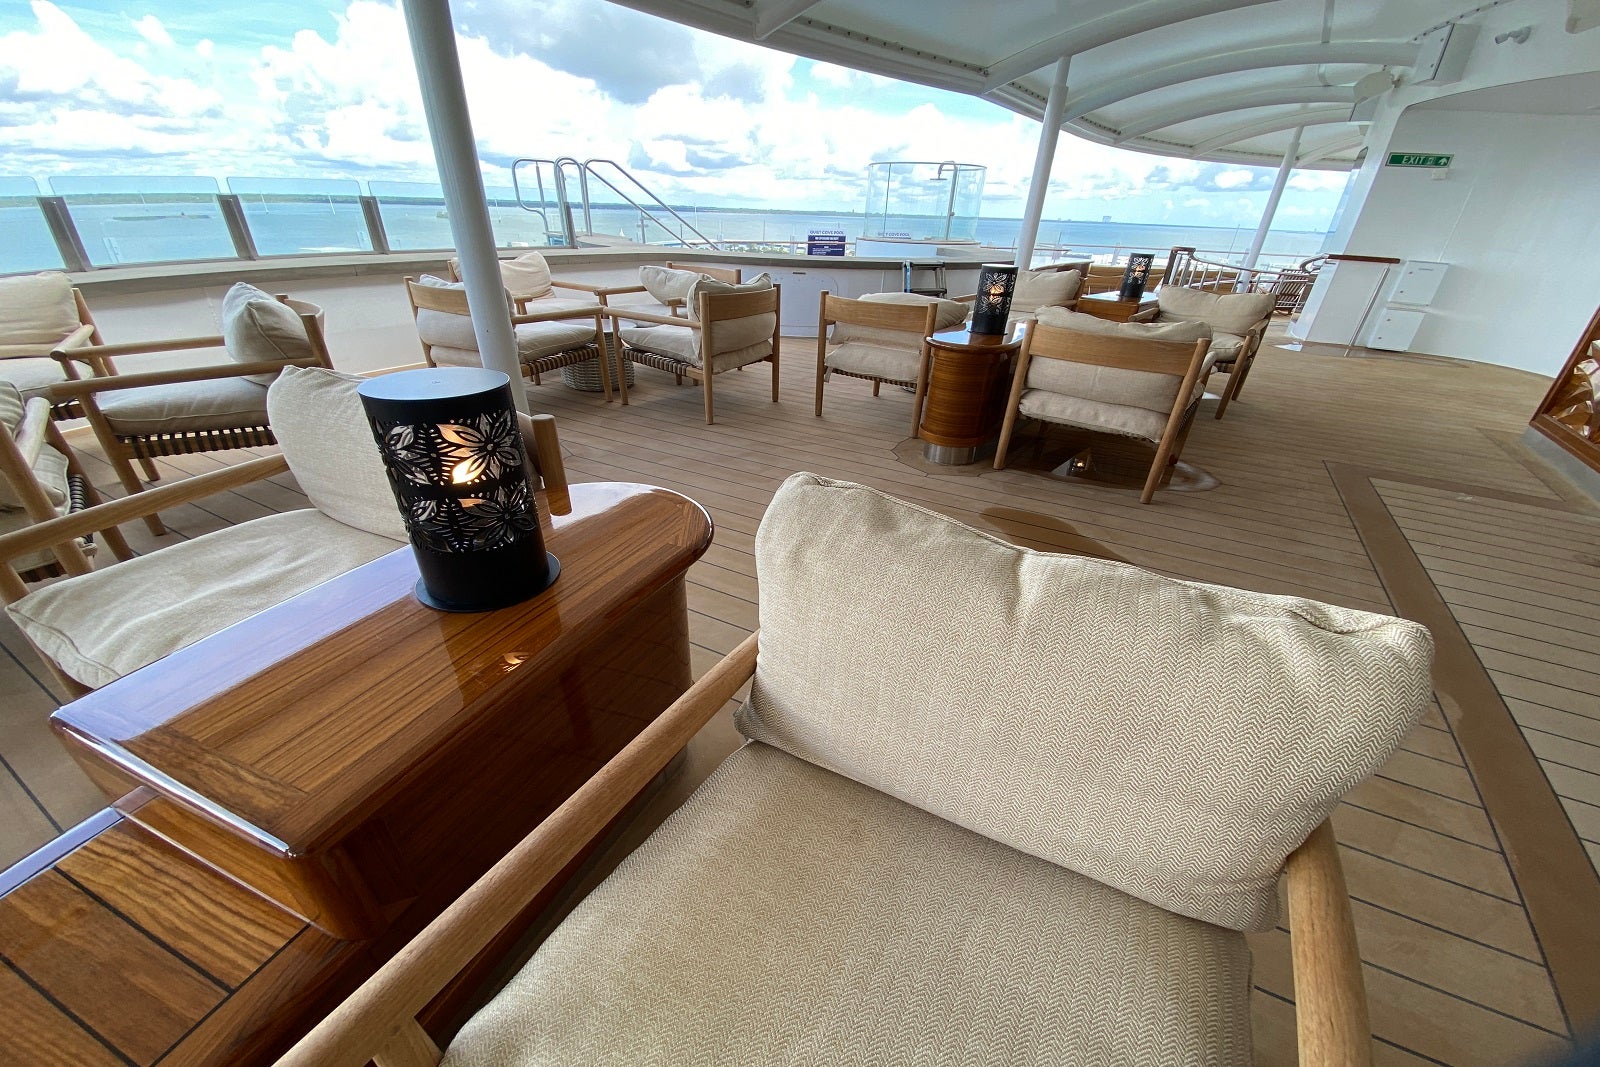 Neutral-colored tables and chairs on an open-air sun deck on a cruise ship